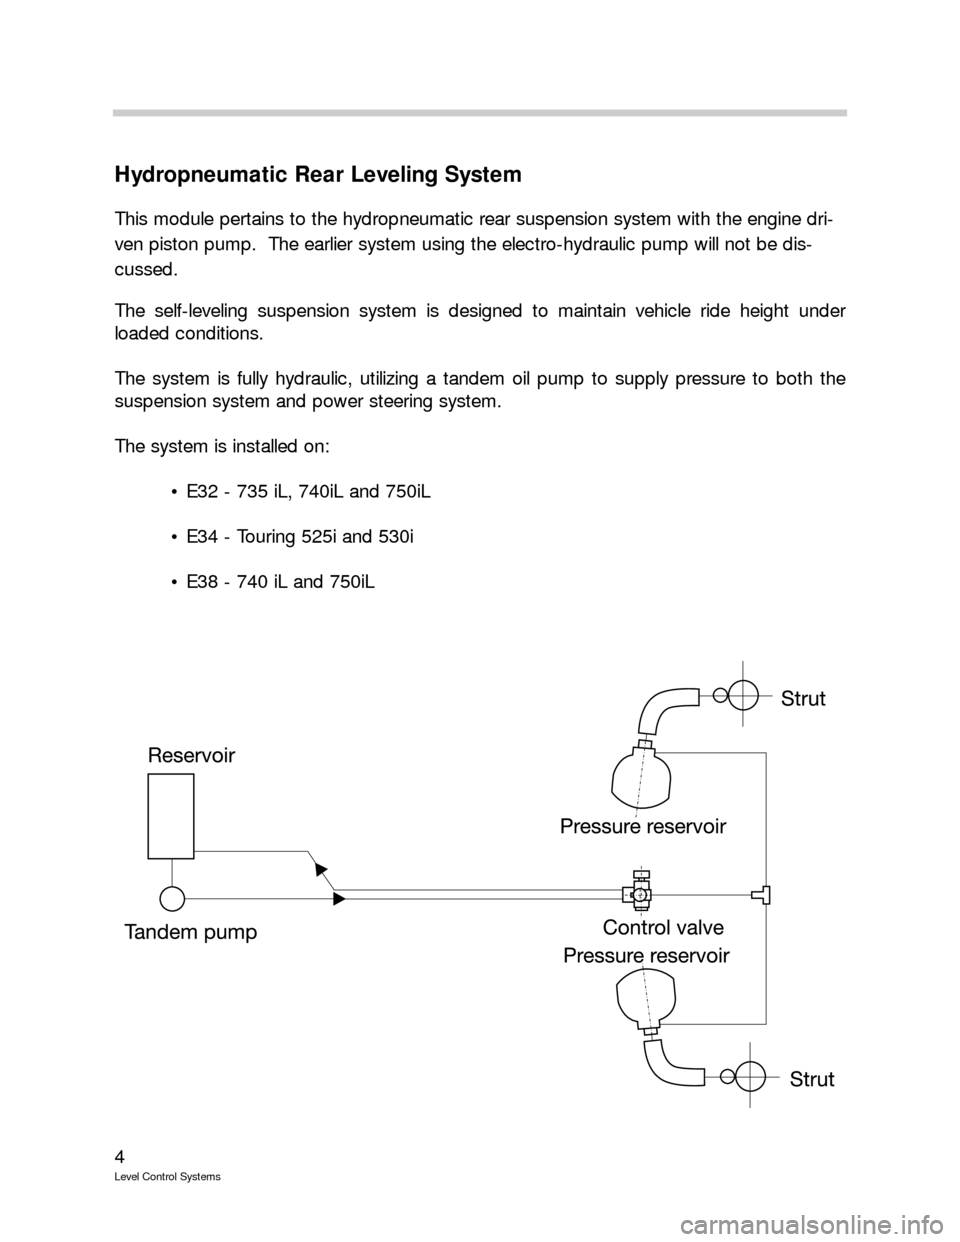 BMW 750IL 1996 E38 Level Control System Manual 4
Level Control Systems
Hydropneumatic Rear Leveling System
This module pertains to the hydropneumatic rear suspension system with the engine dri-
ven piston pump.  The earlier system using the electr